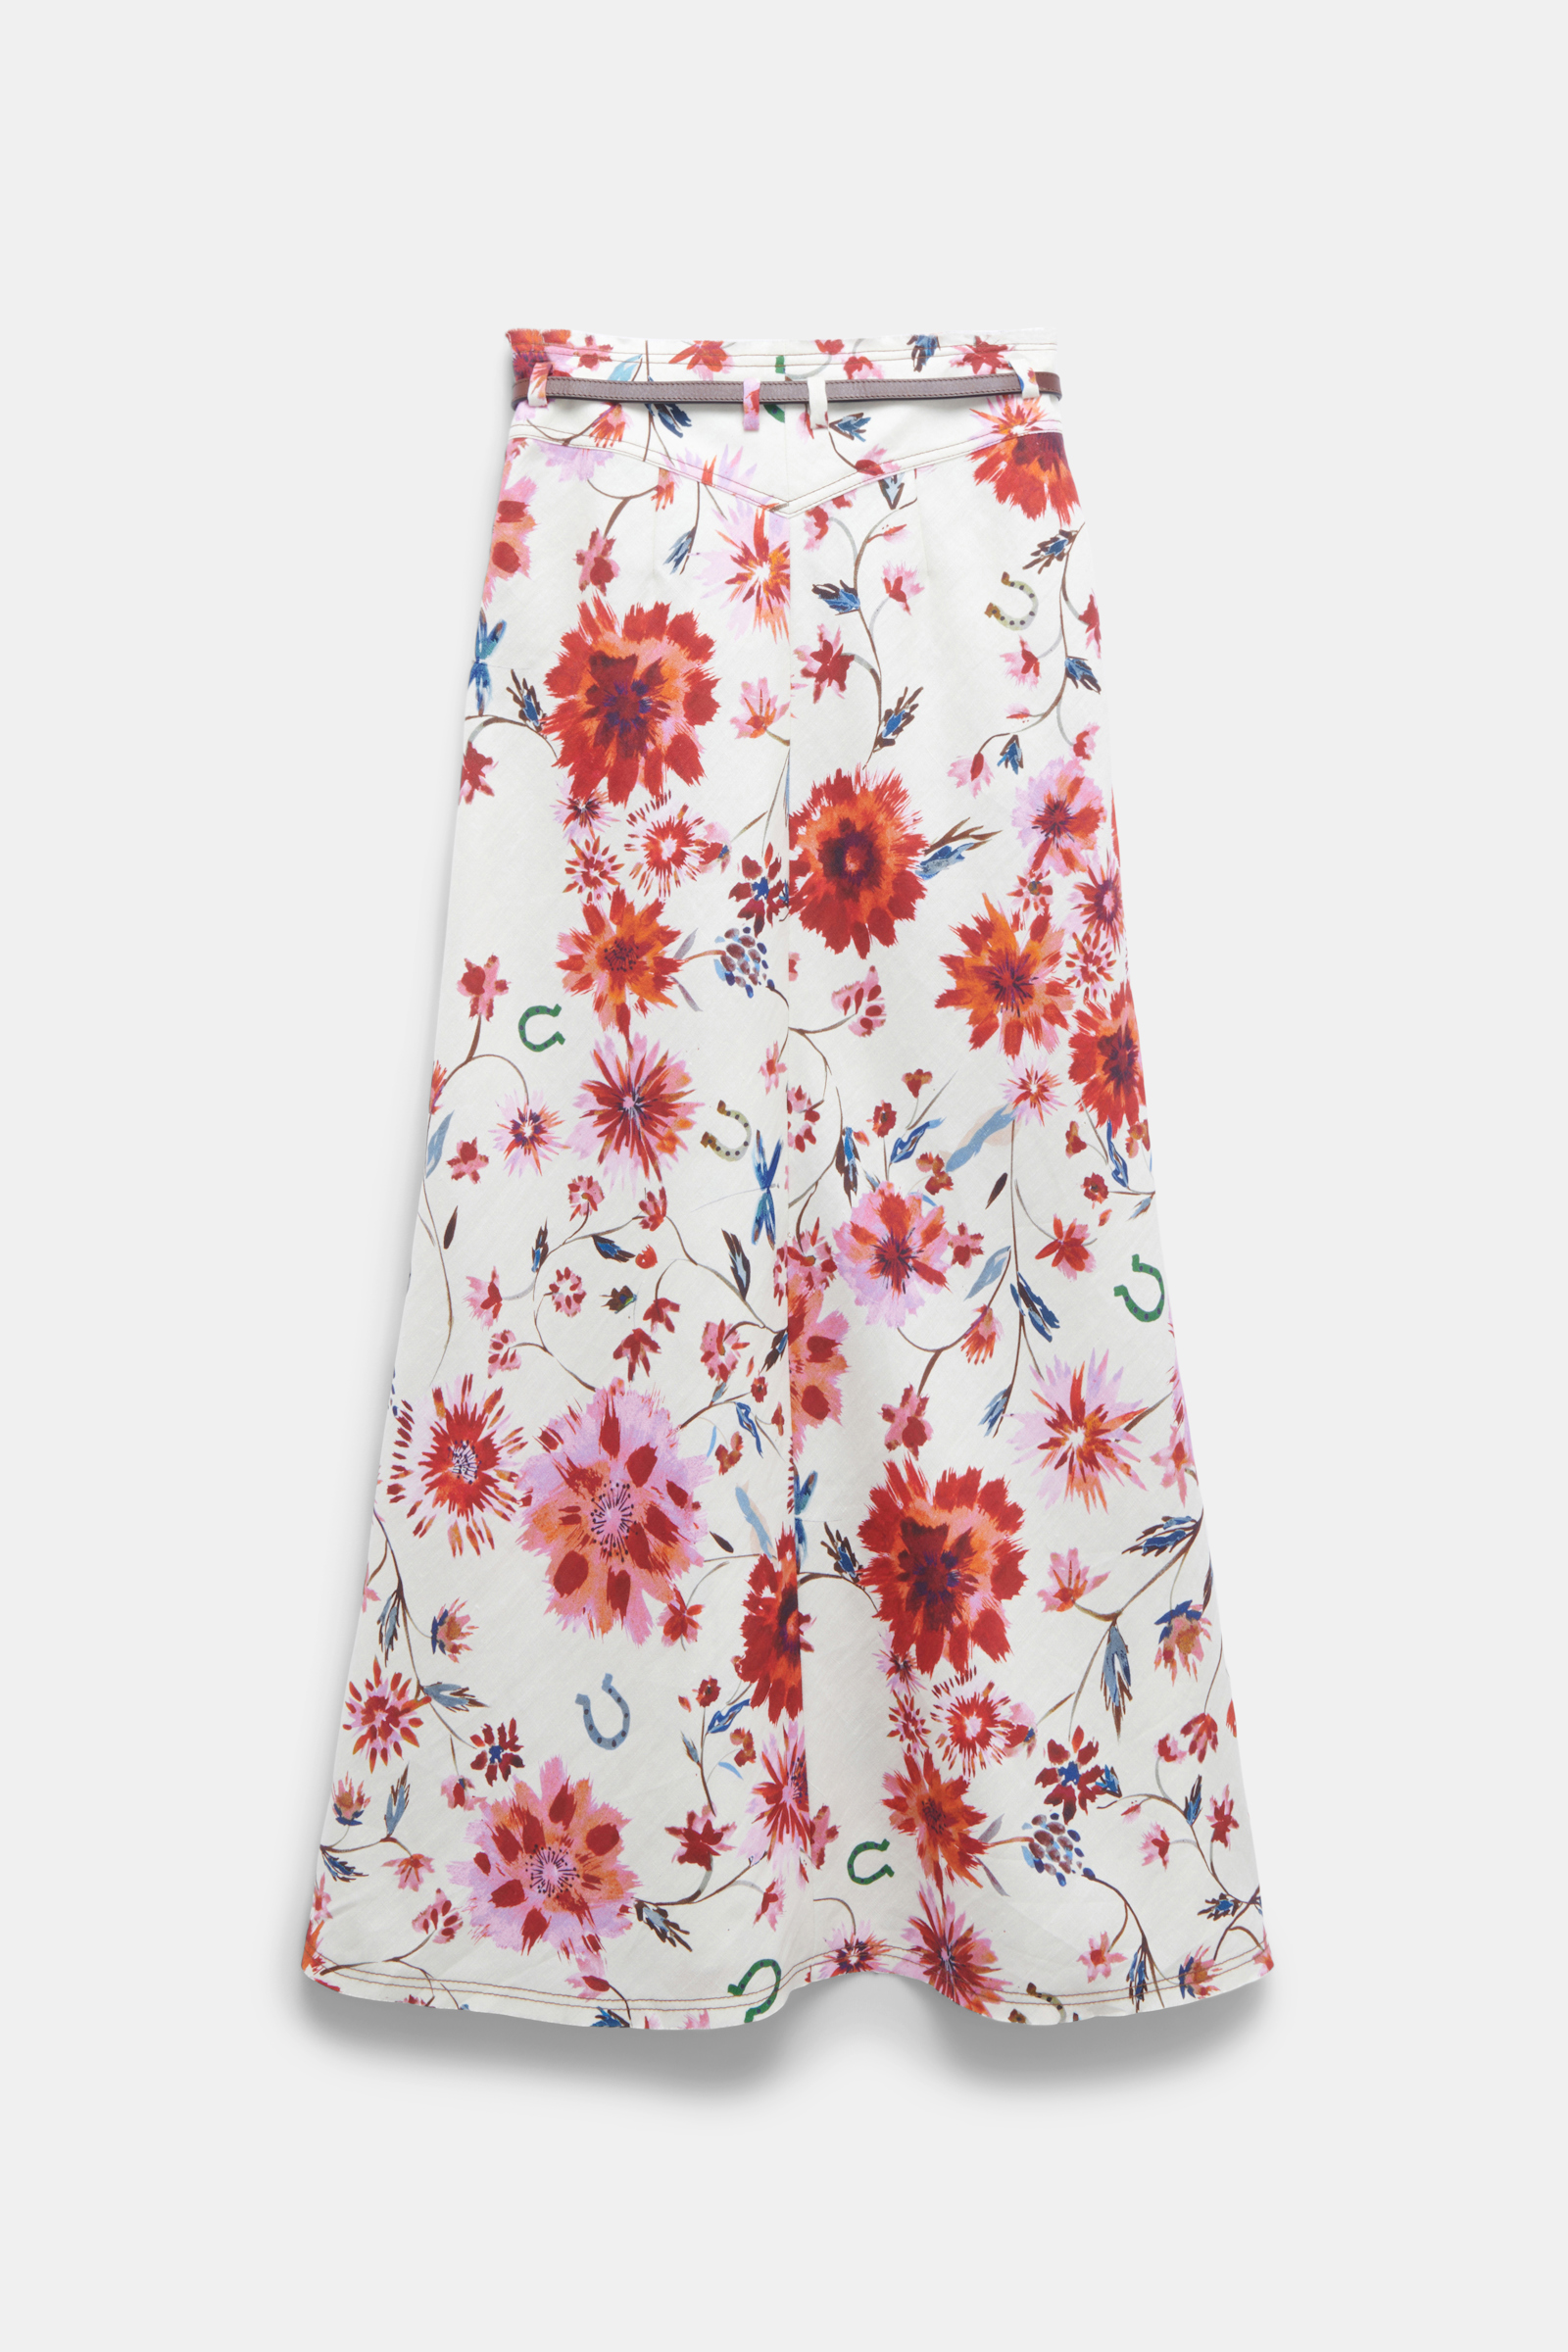 Dorothee Schumacher Printed linen skirt with removable leather tie belt floral mix